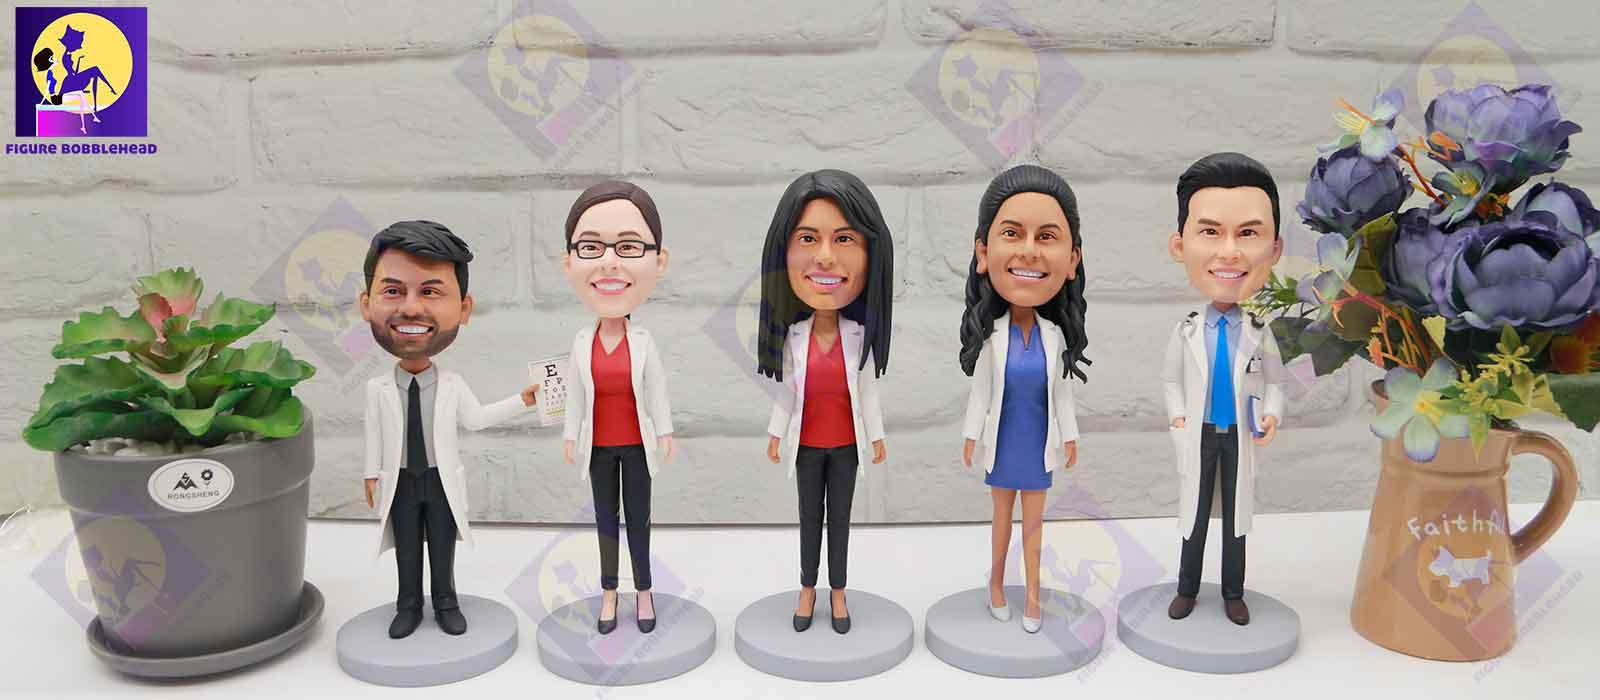 Custom Doctor Bobbleheads As 2022 Best Doctors' Day Gifts - Figure Bobblehead